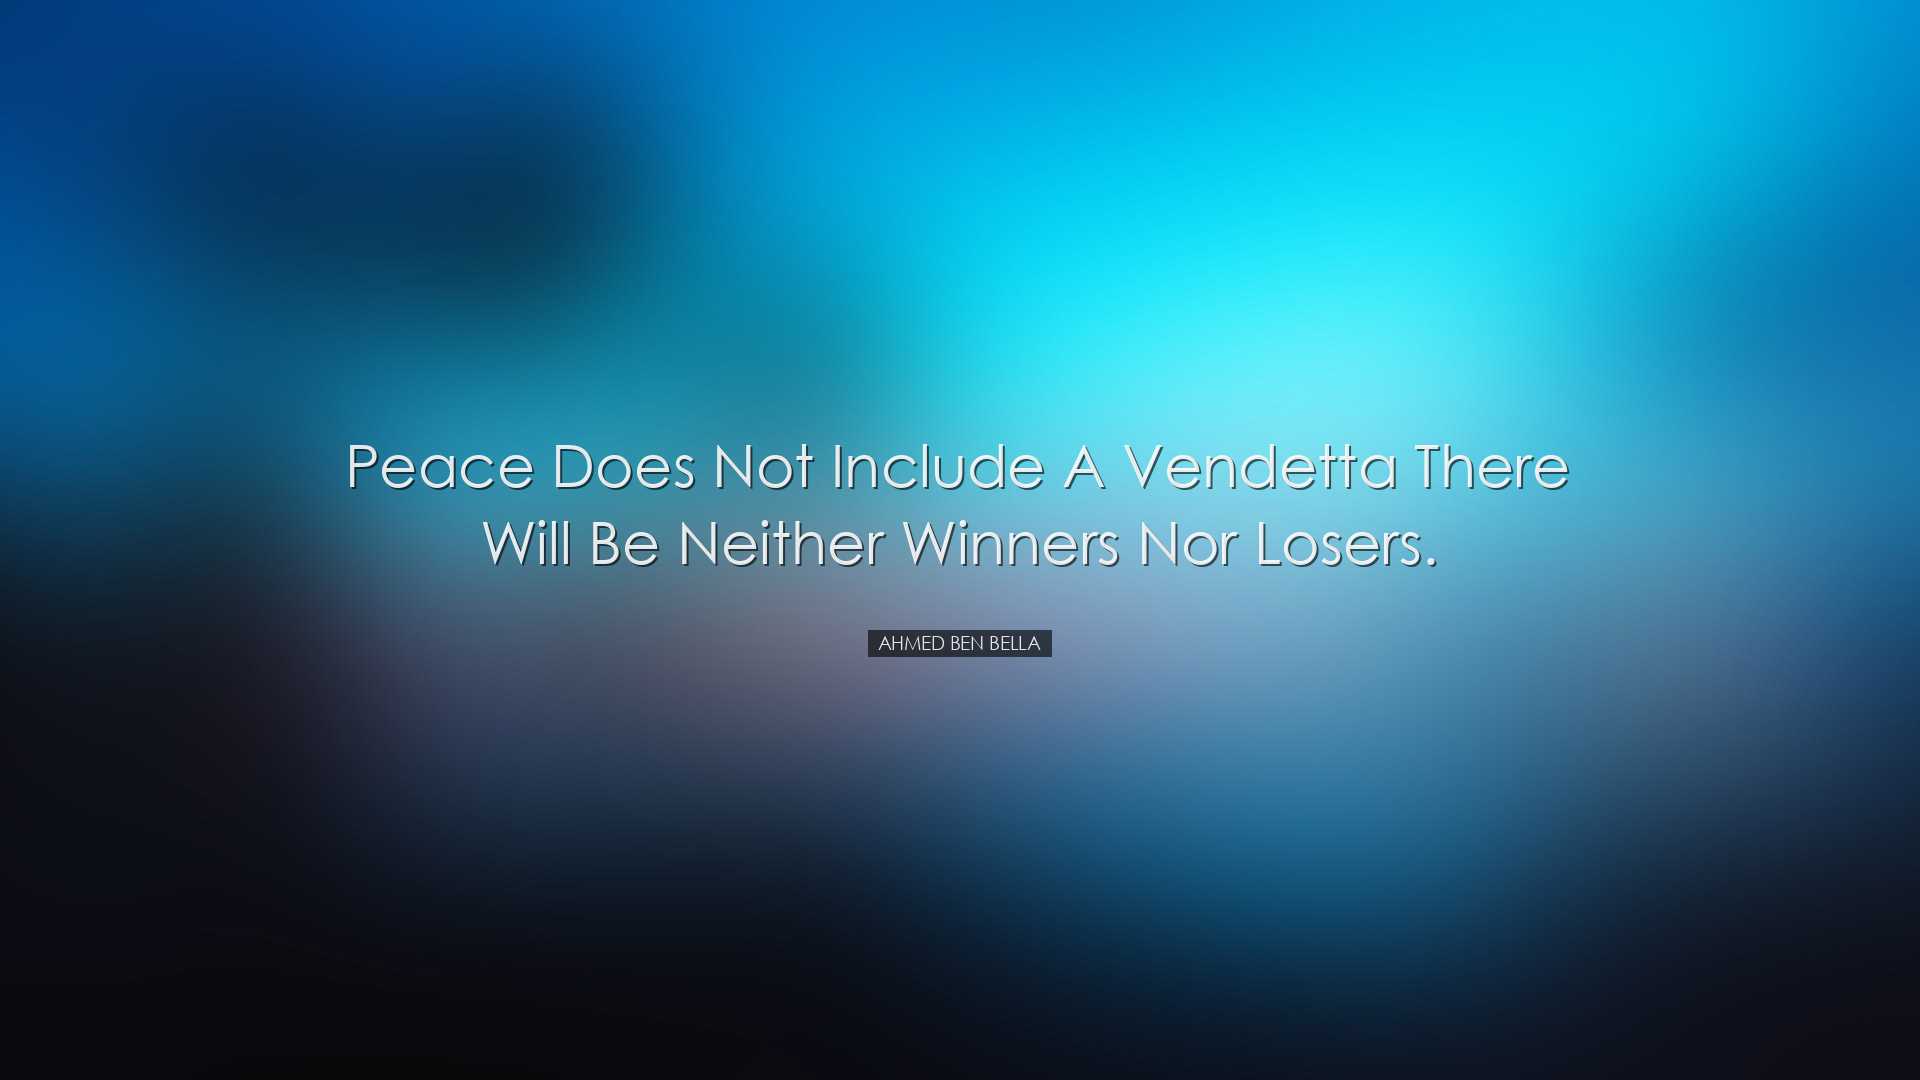 Peace does not include a vendetta there will be neither winners no